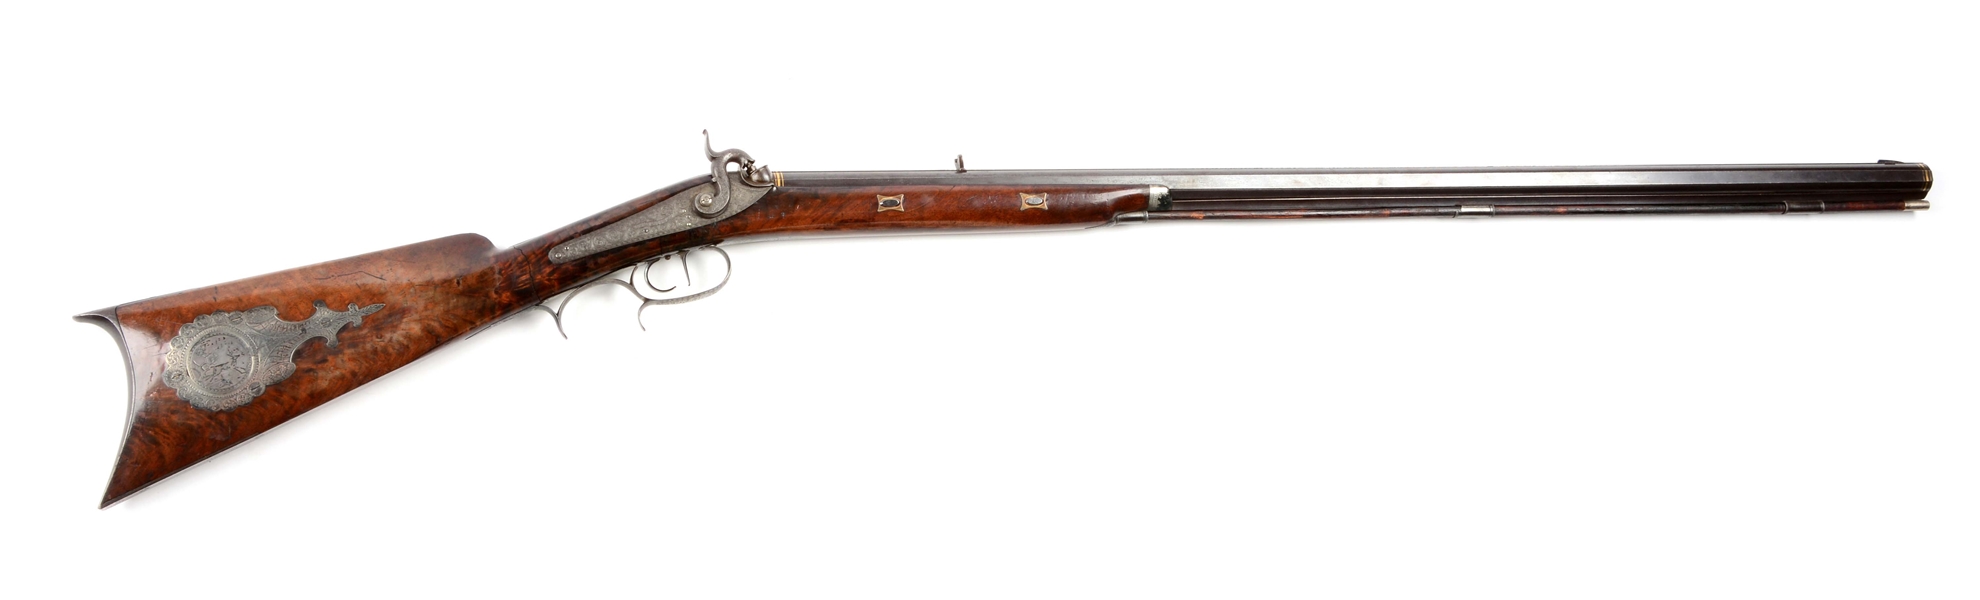 (A) FINE & EXTRAORDINARY SILVER & GOLD MOUNTED PERCUSSION RIFLE BY FITZPATRICK.